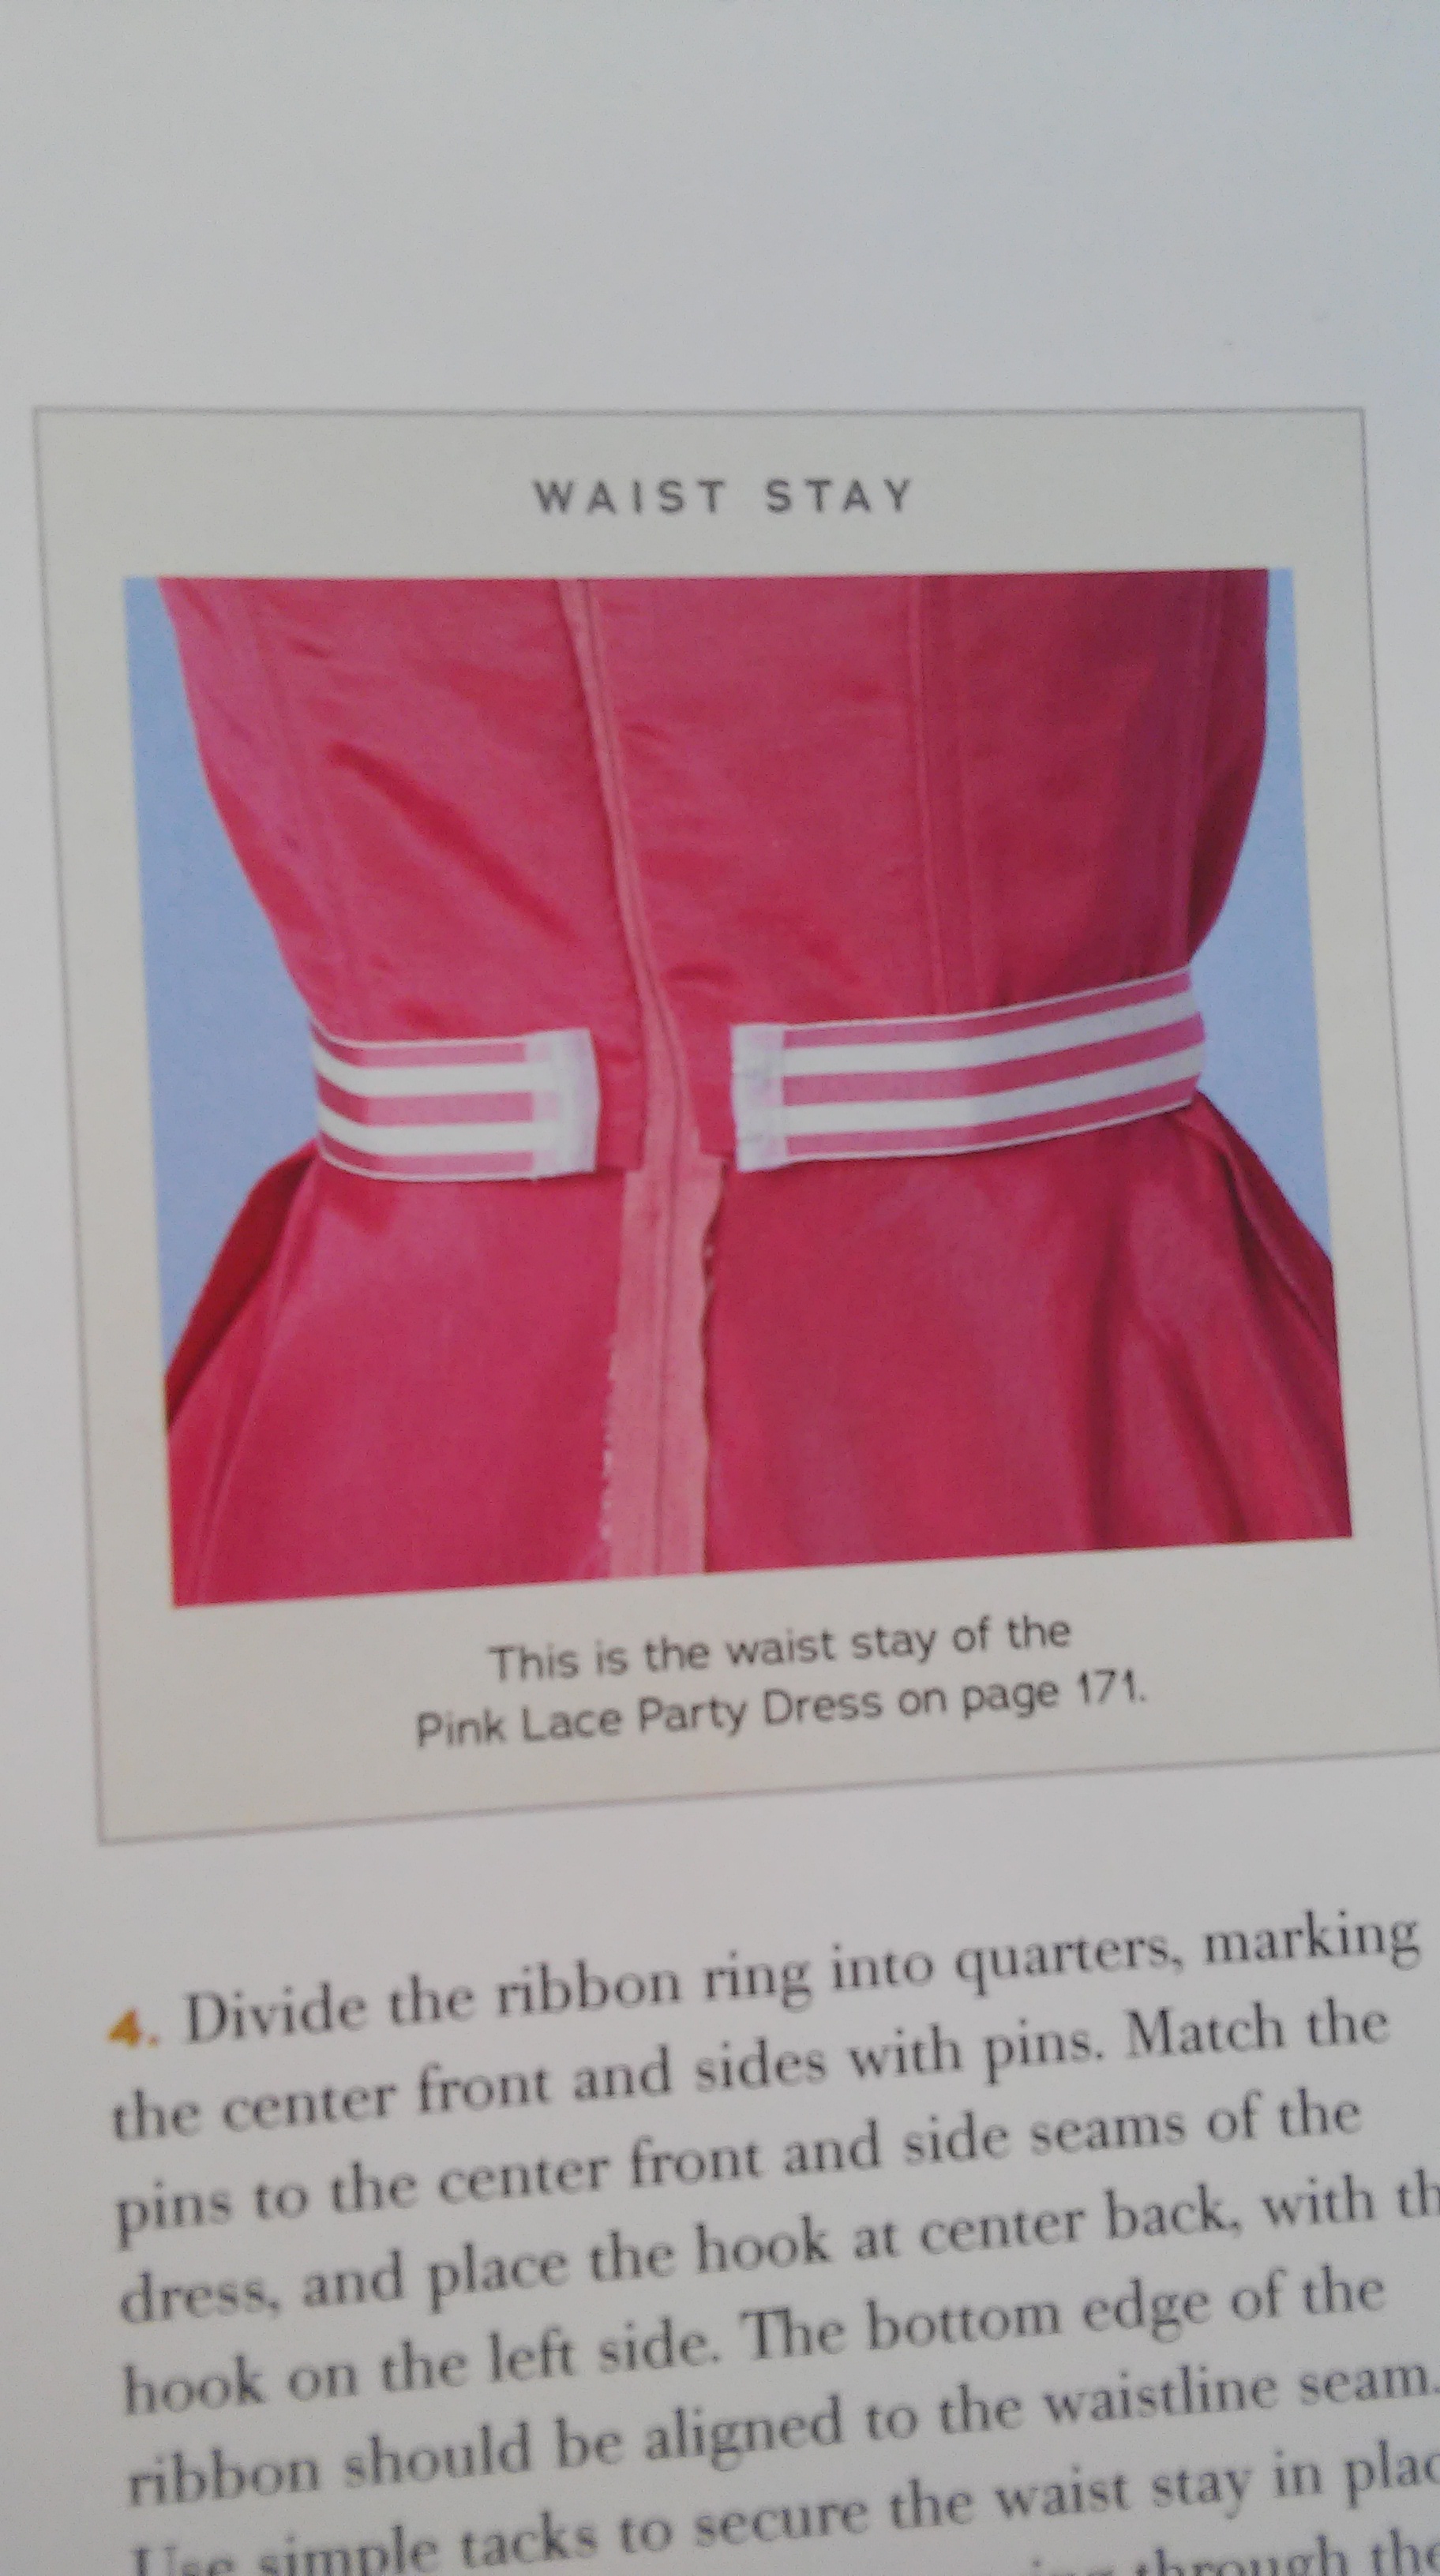 picture of a waist stay on the waist of a dress